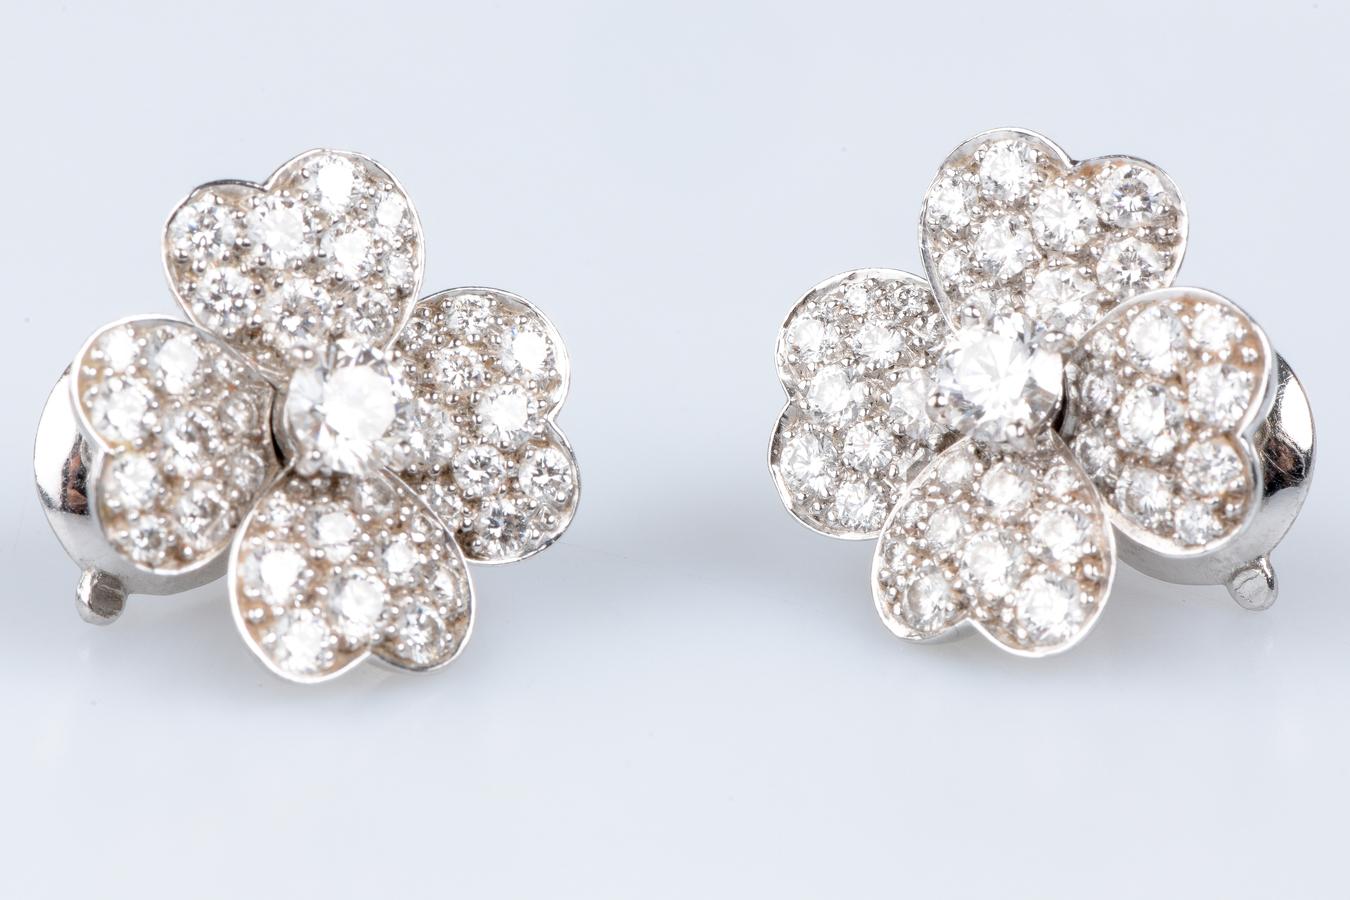 Evoking the grace and sophistication of 1950s jewelry, Van Cleef & Arpels earrings are a treasure trove of 21st-century jewelry art. Created in the 2000s, these sumptuous earrings in the shape of a four-leaf clover embody the timeless heritage of